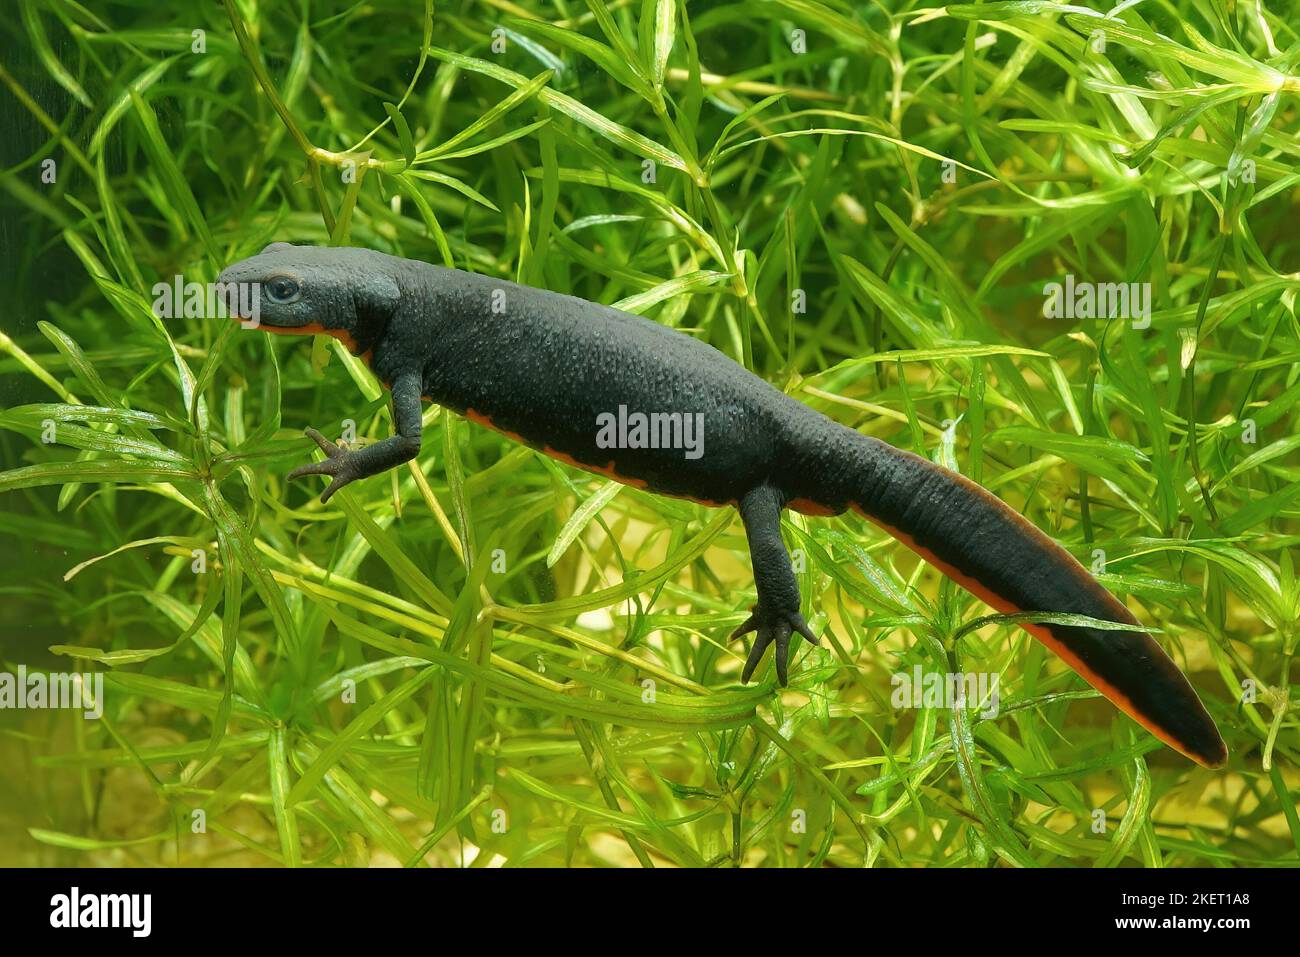 Closeup on an aquatic adult female Chinese fire-bellied newt, Cynops orientalis , underwater Stock Photo